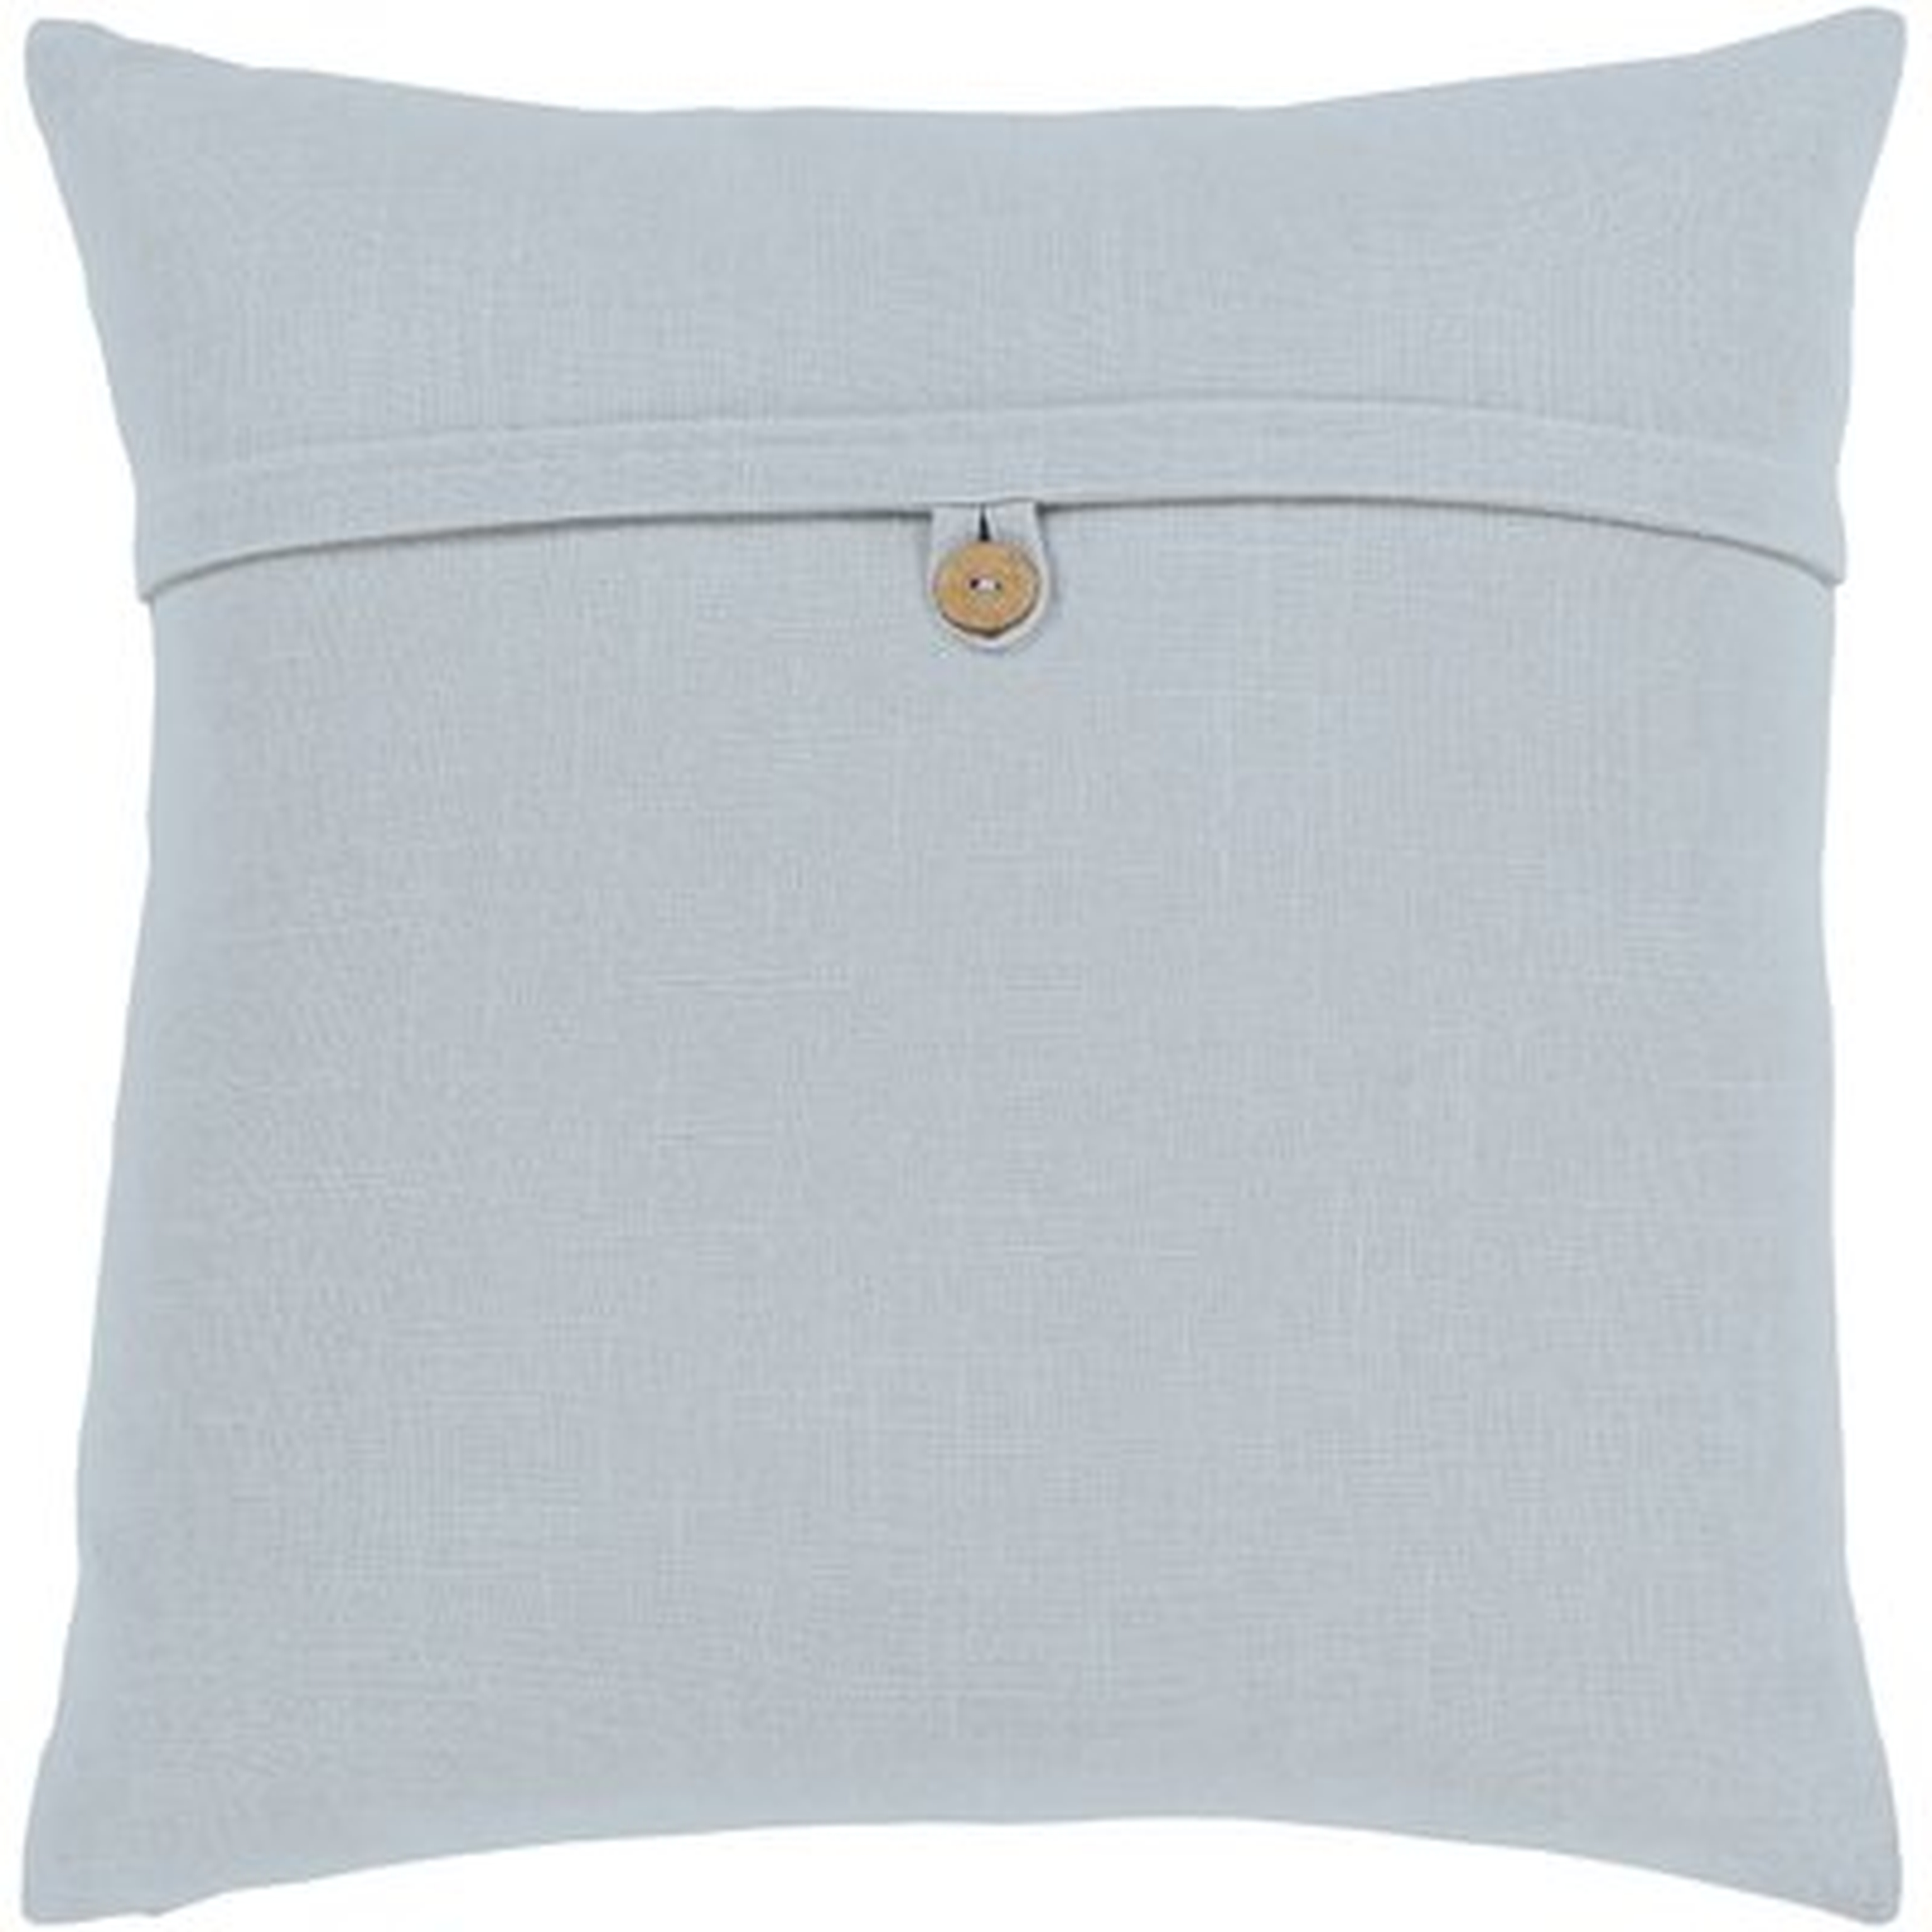 Global Blues Throw Square Cotton Pillow Cover & Insert - Wayfair